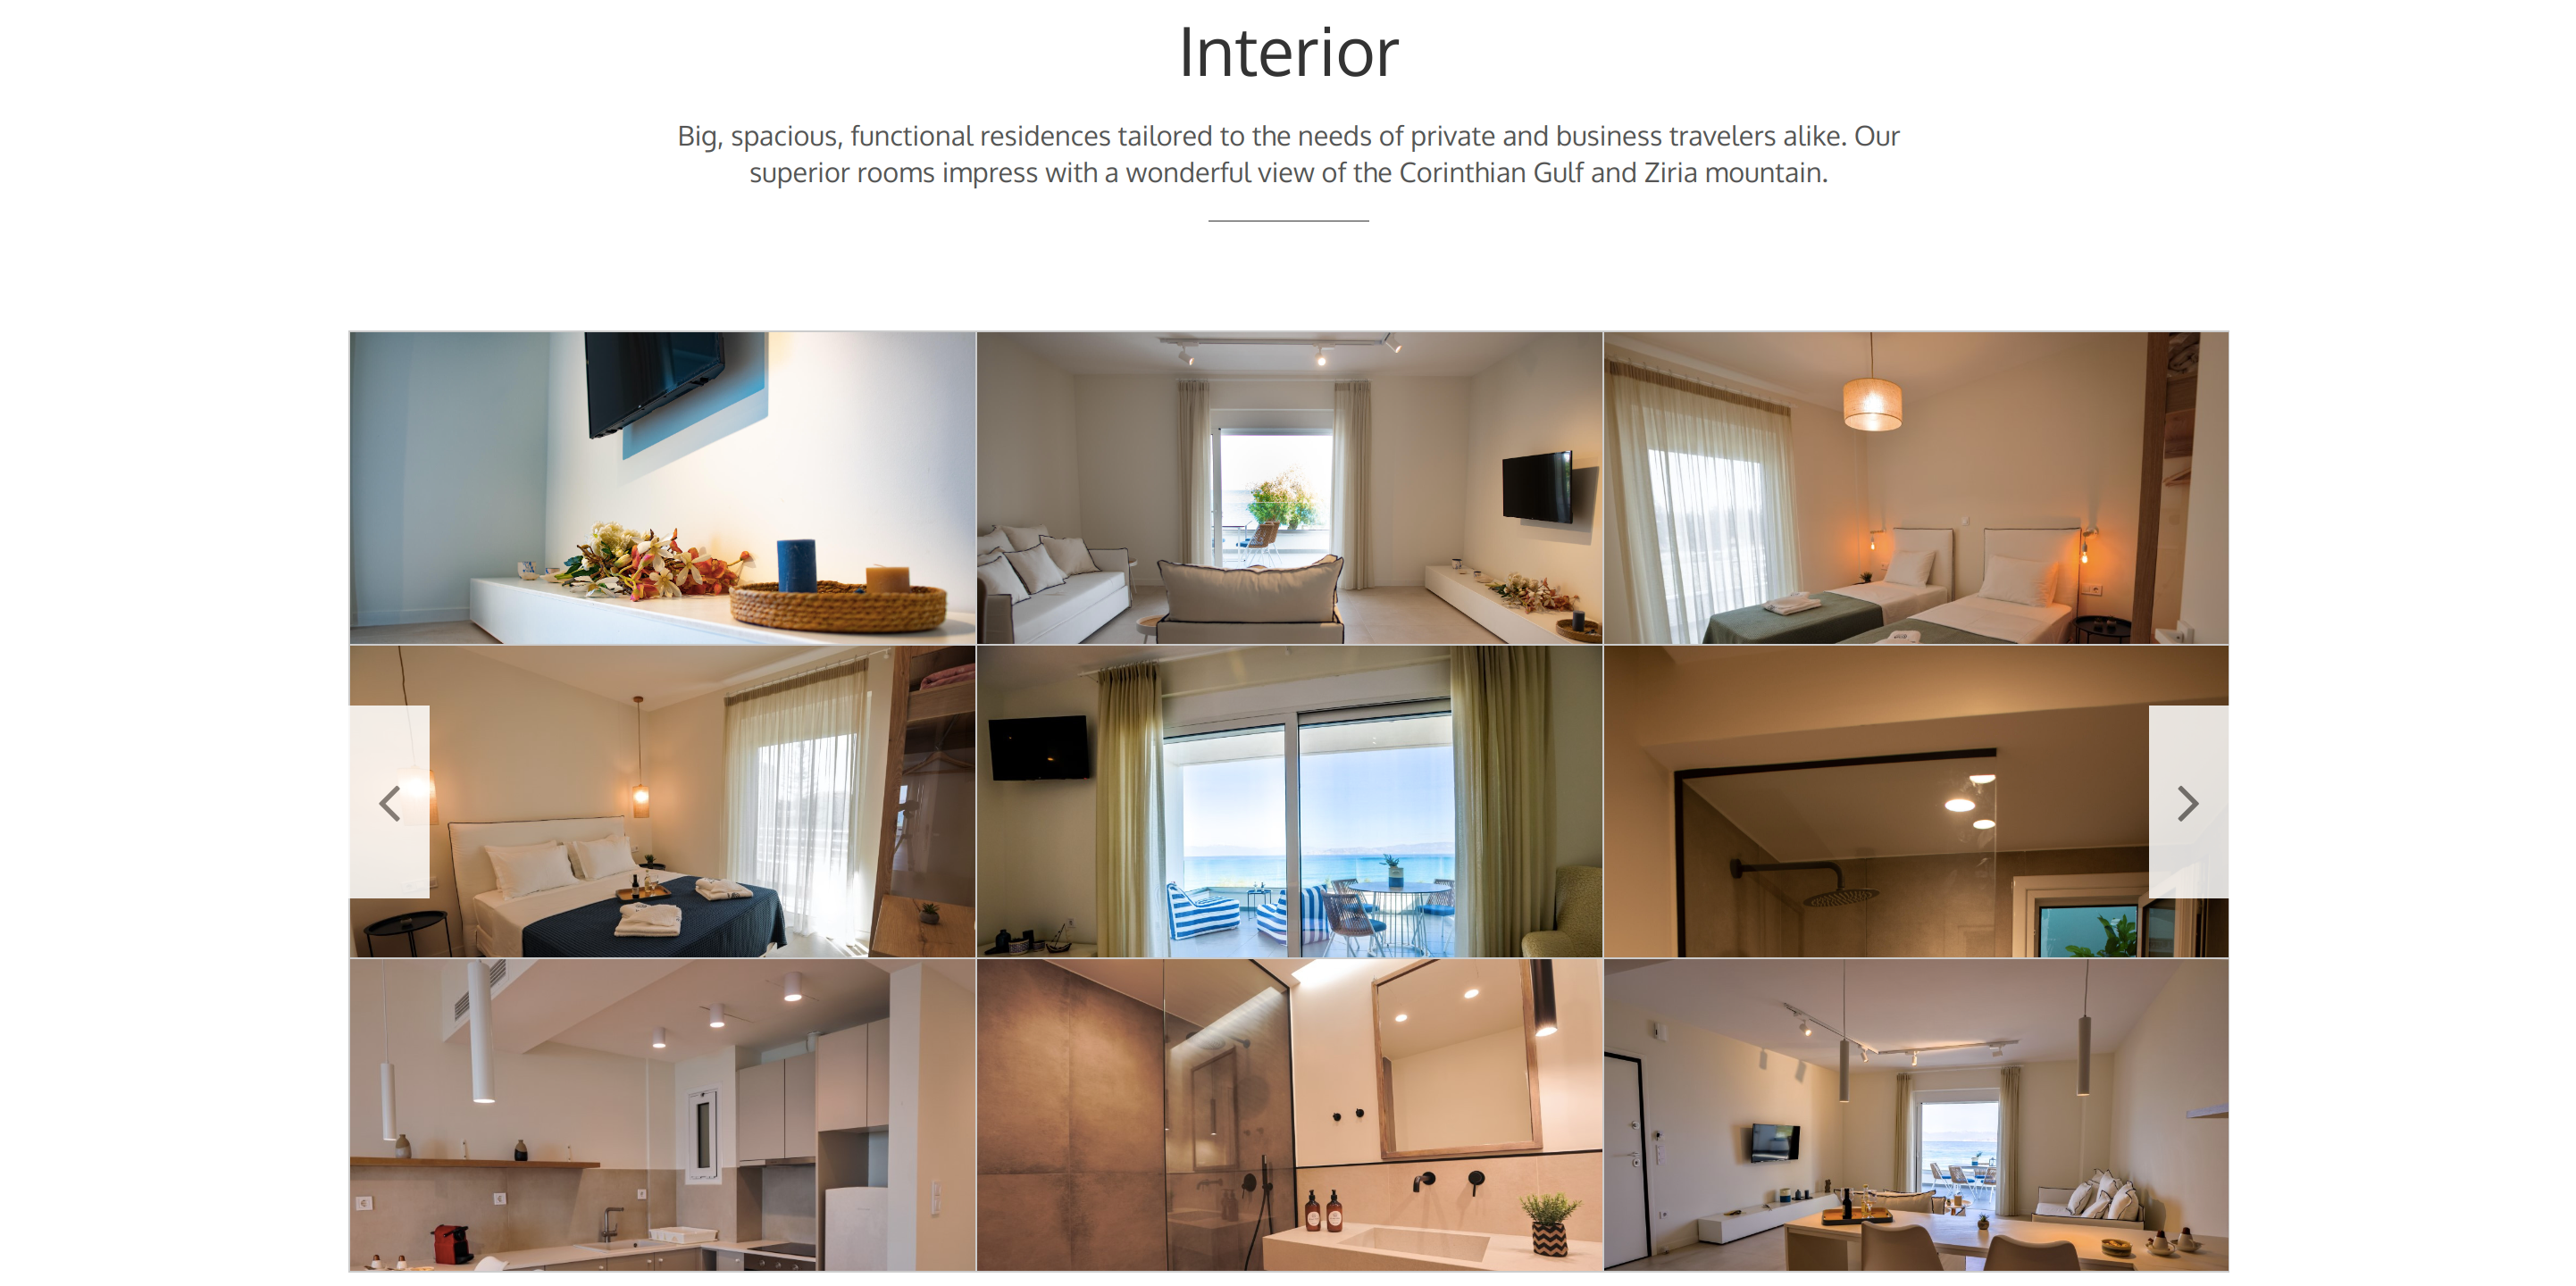 La Mer Bleue interior section on Home Page